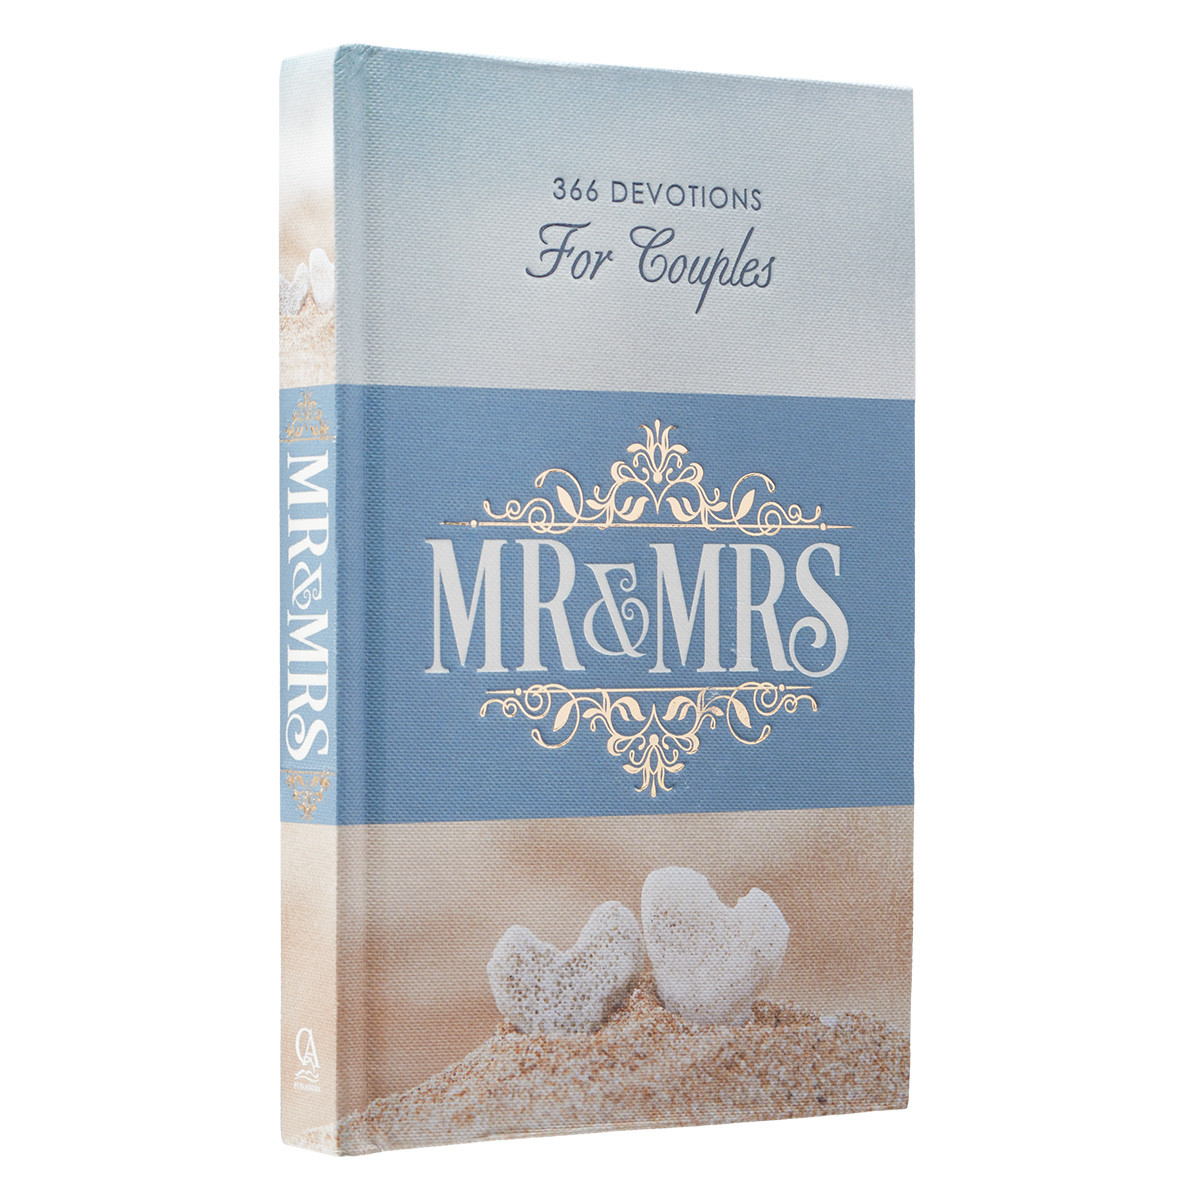 Mr. and Mrs. Devotional